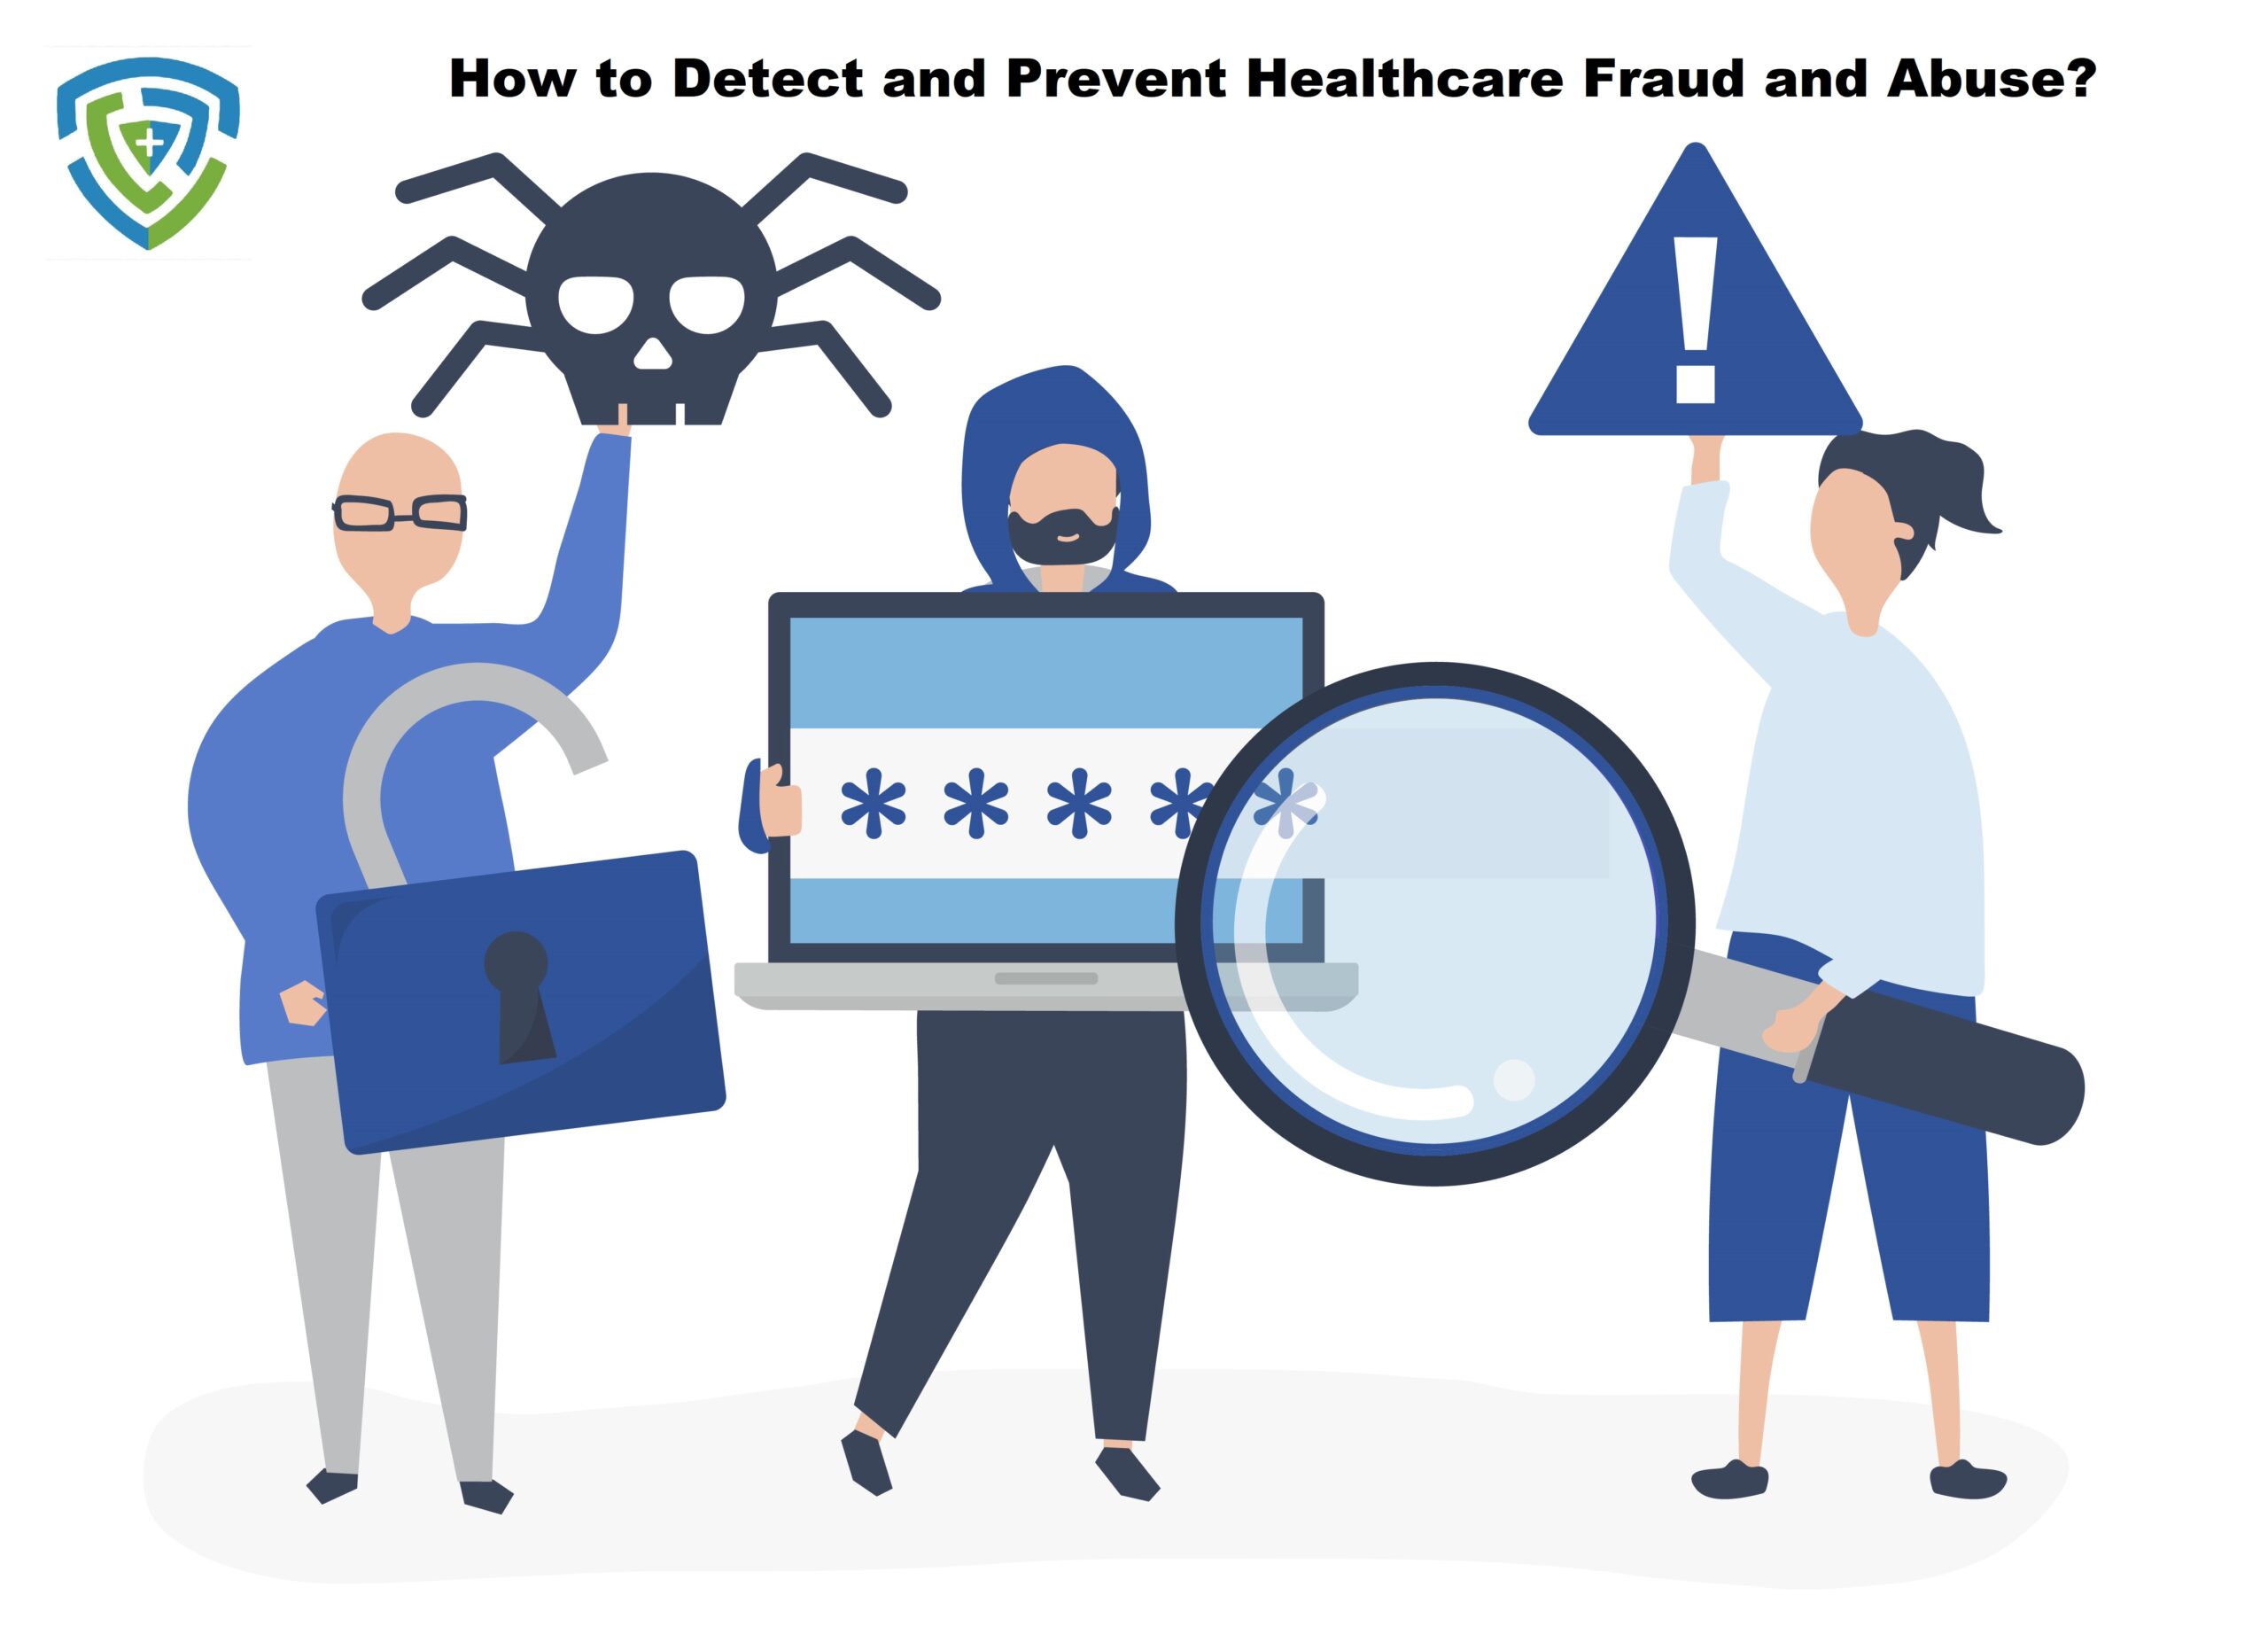 How to Detect and Prevent Healthcare Fraud and Abuse?